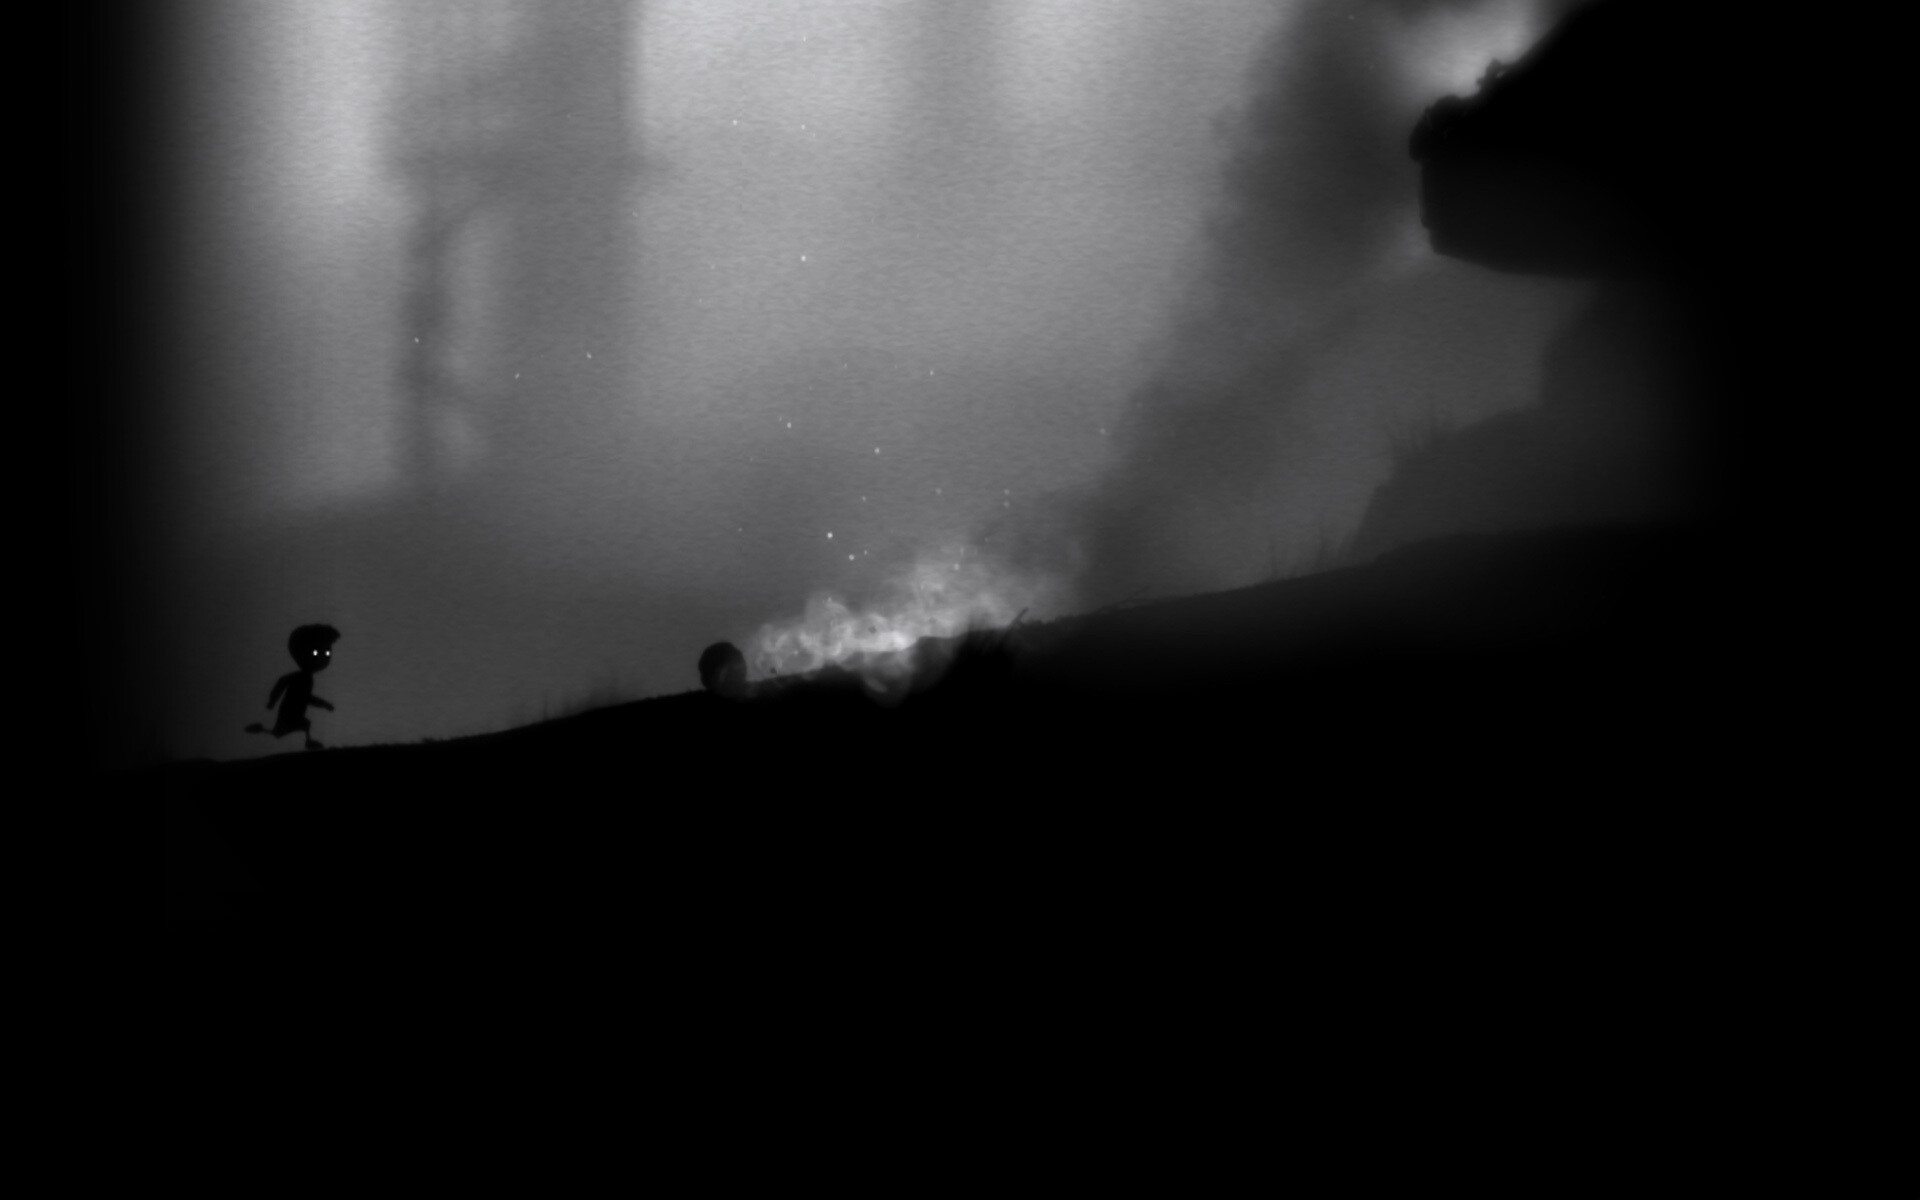 Limbo: Among the hazards are glowing worms, which attach themselves to the boy's head and force him to travel in only one direction until they are killed, Video game. 1920x1200 HD Wallpaper.